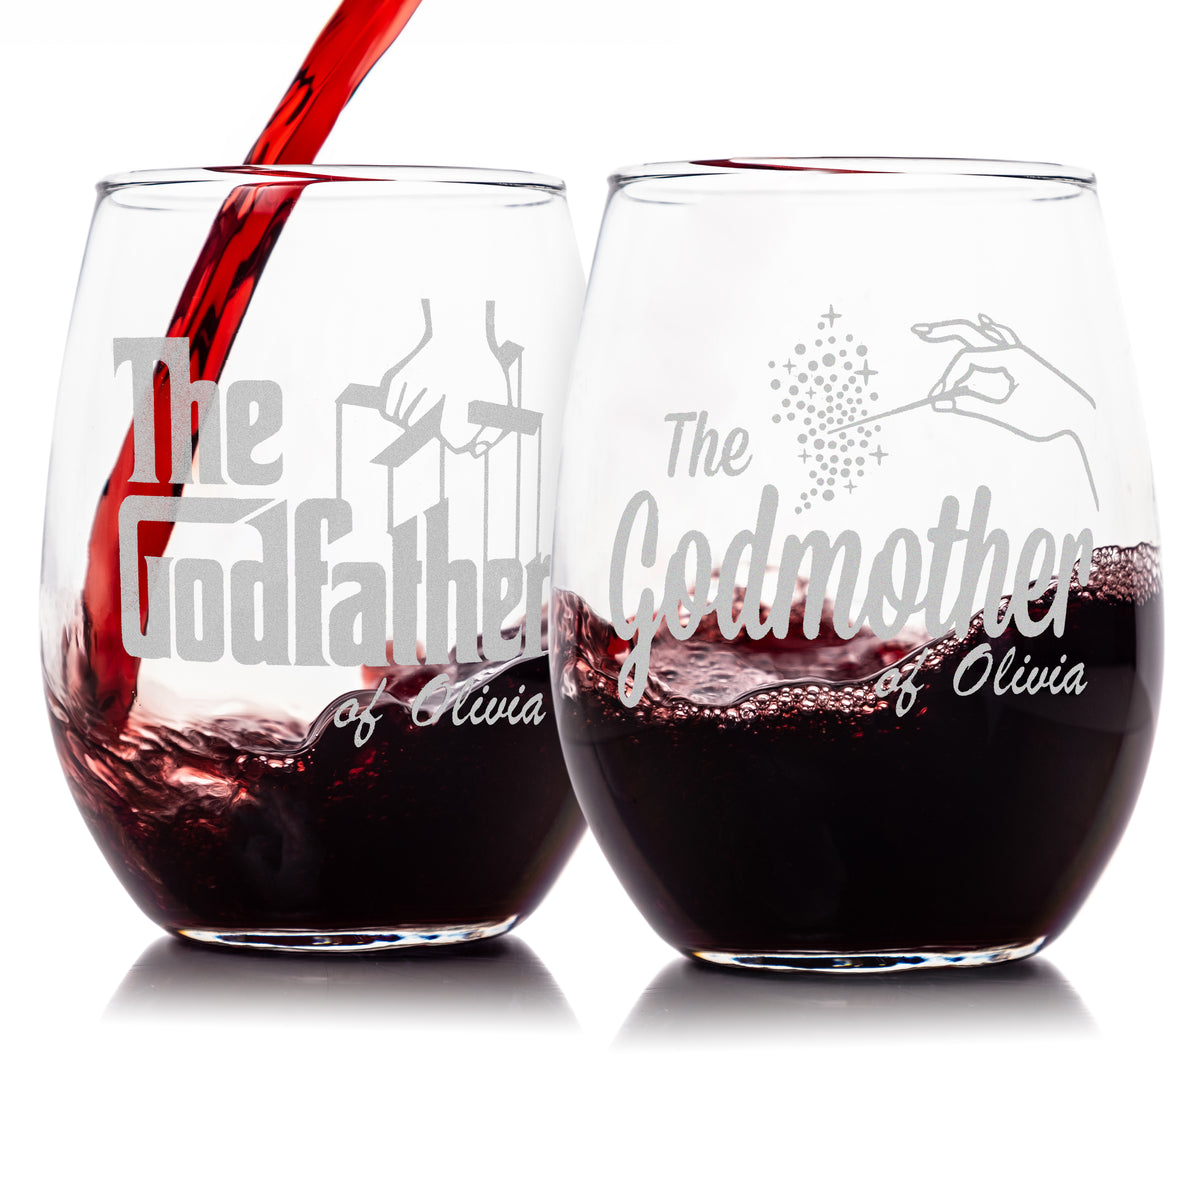 The Godfather Movie Godparent Stemless Glass Gift Set Personalized